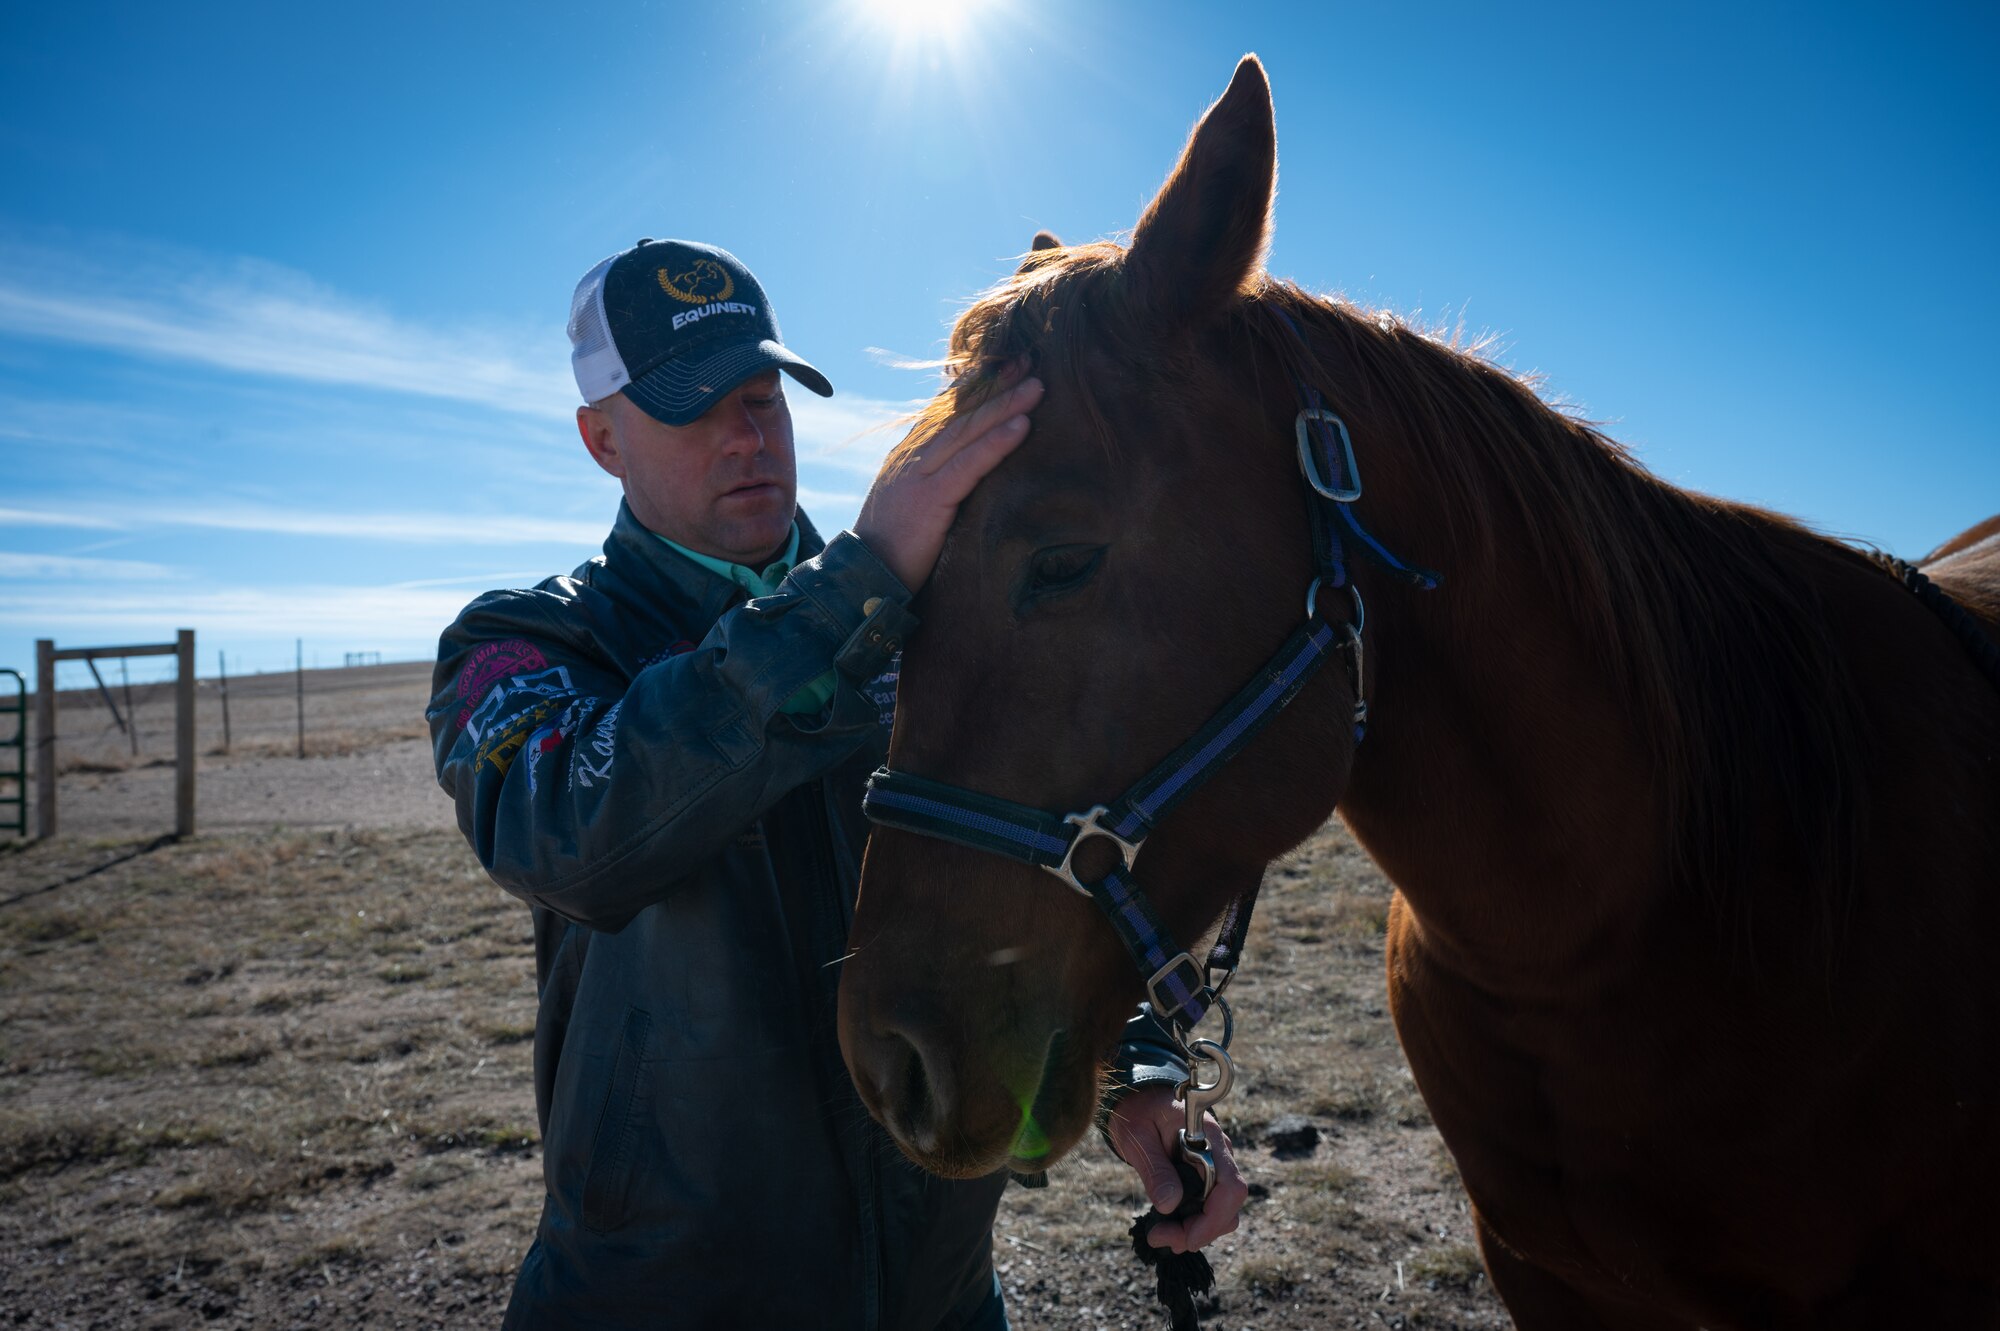 A chief poses with his horse, Gunner.